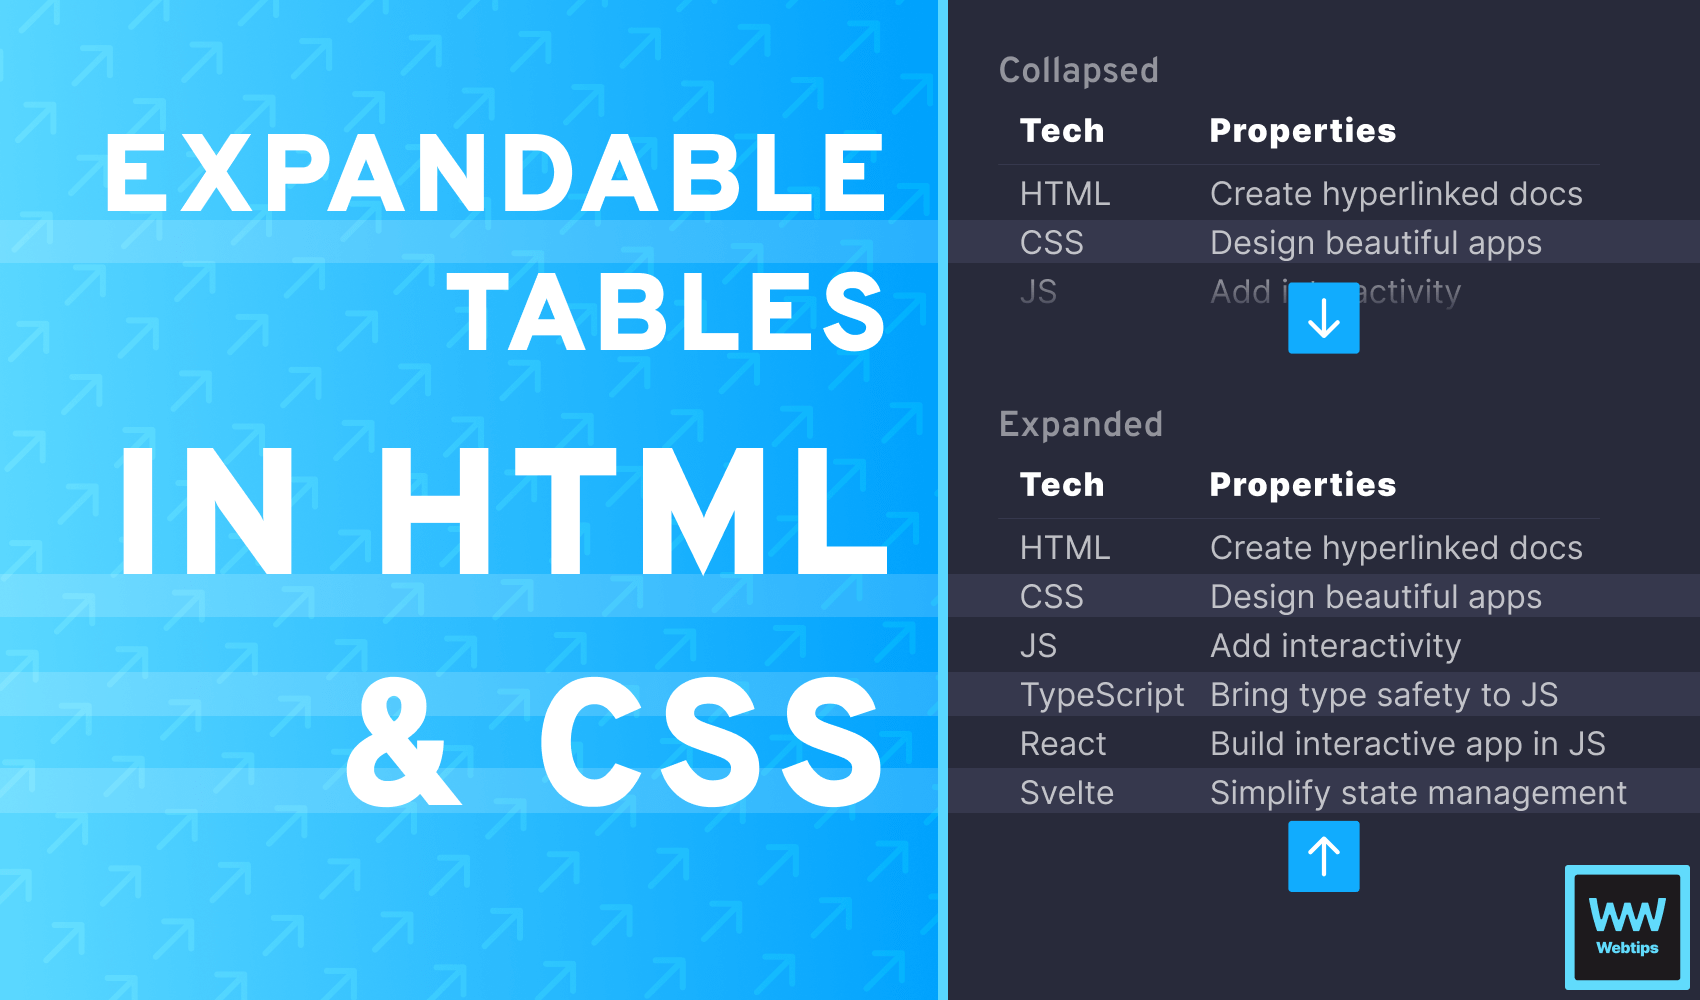 How to Expand and Collapse Tables in HTML Using CSS